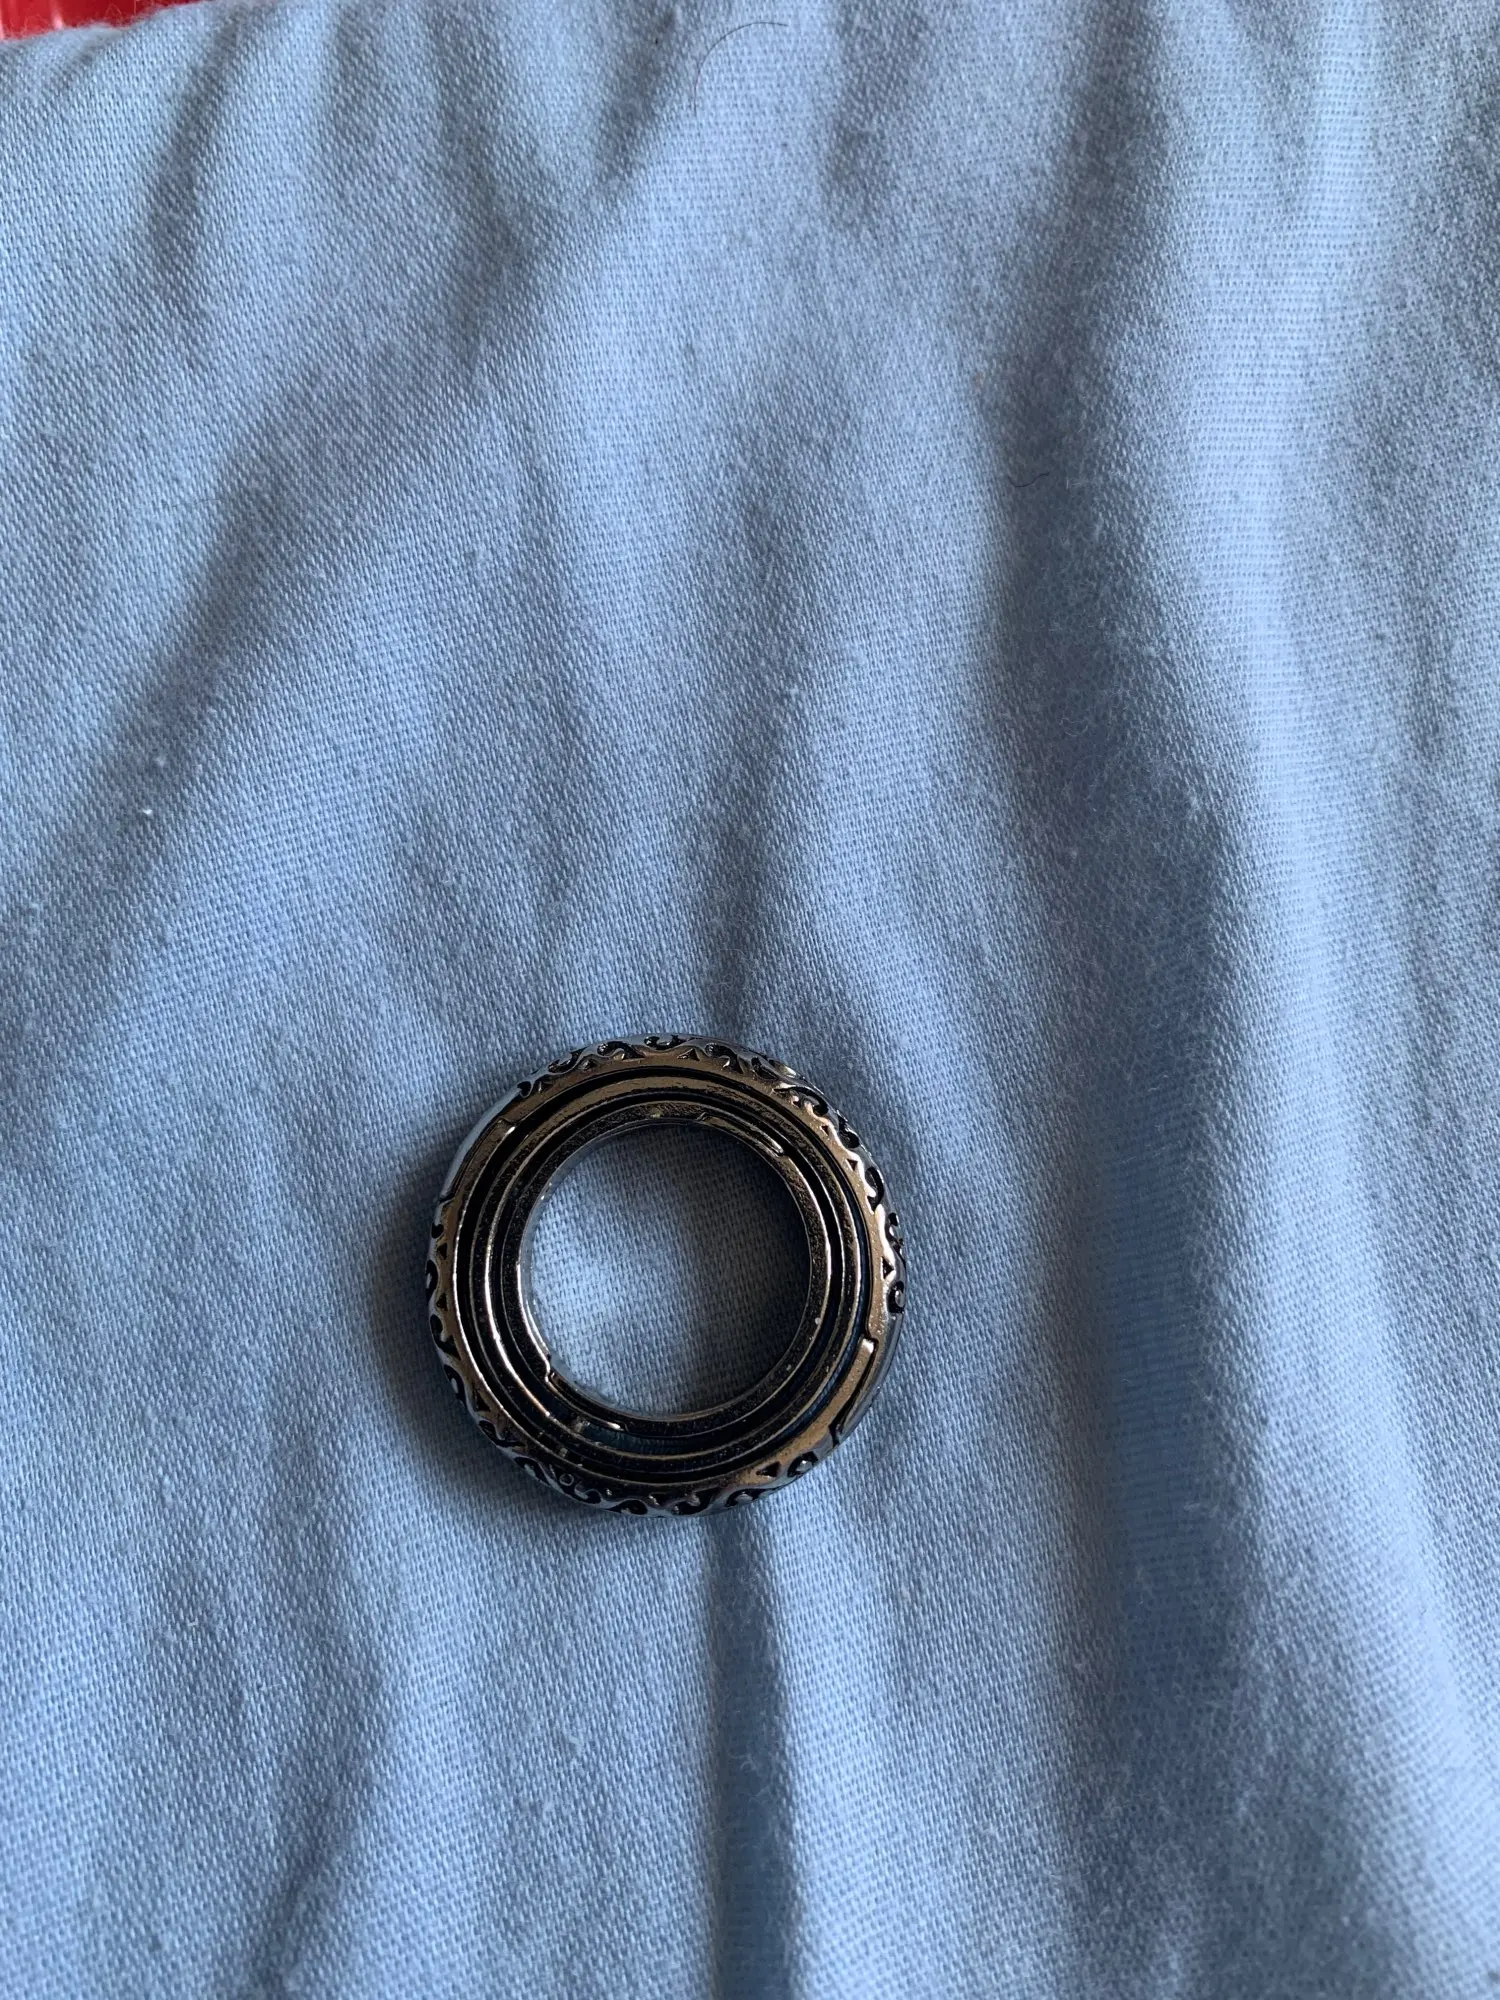 Astronomical Ring photo review